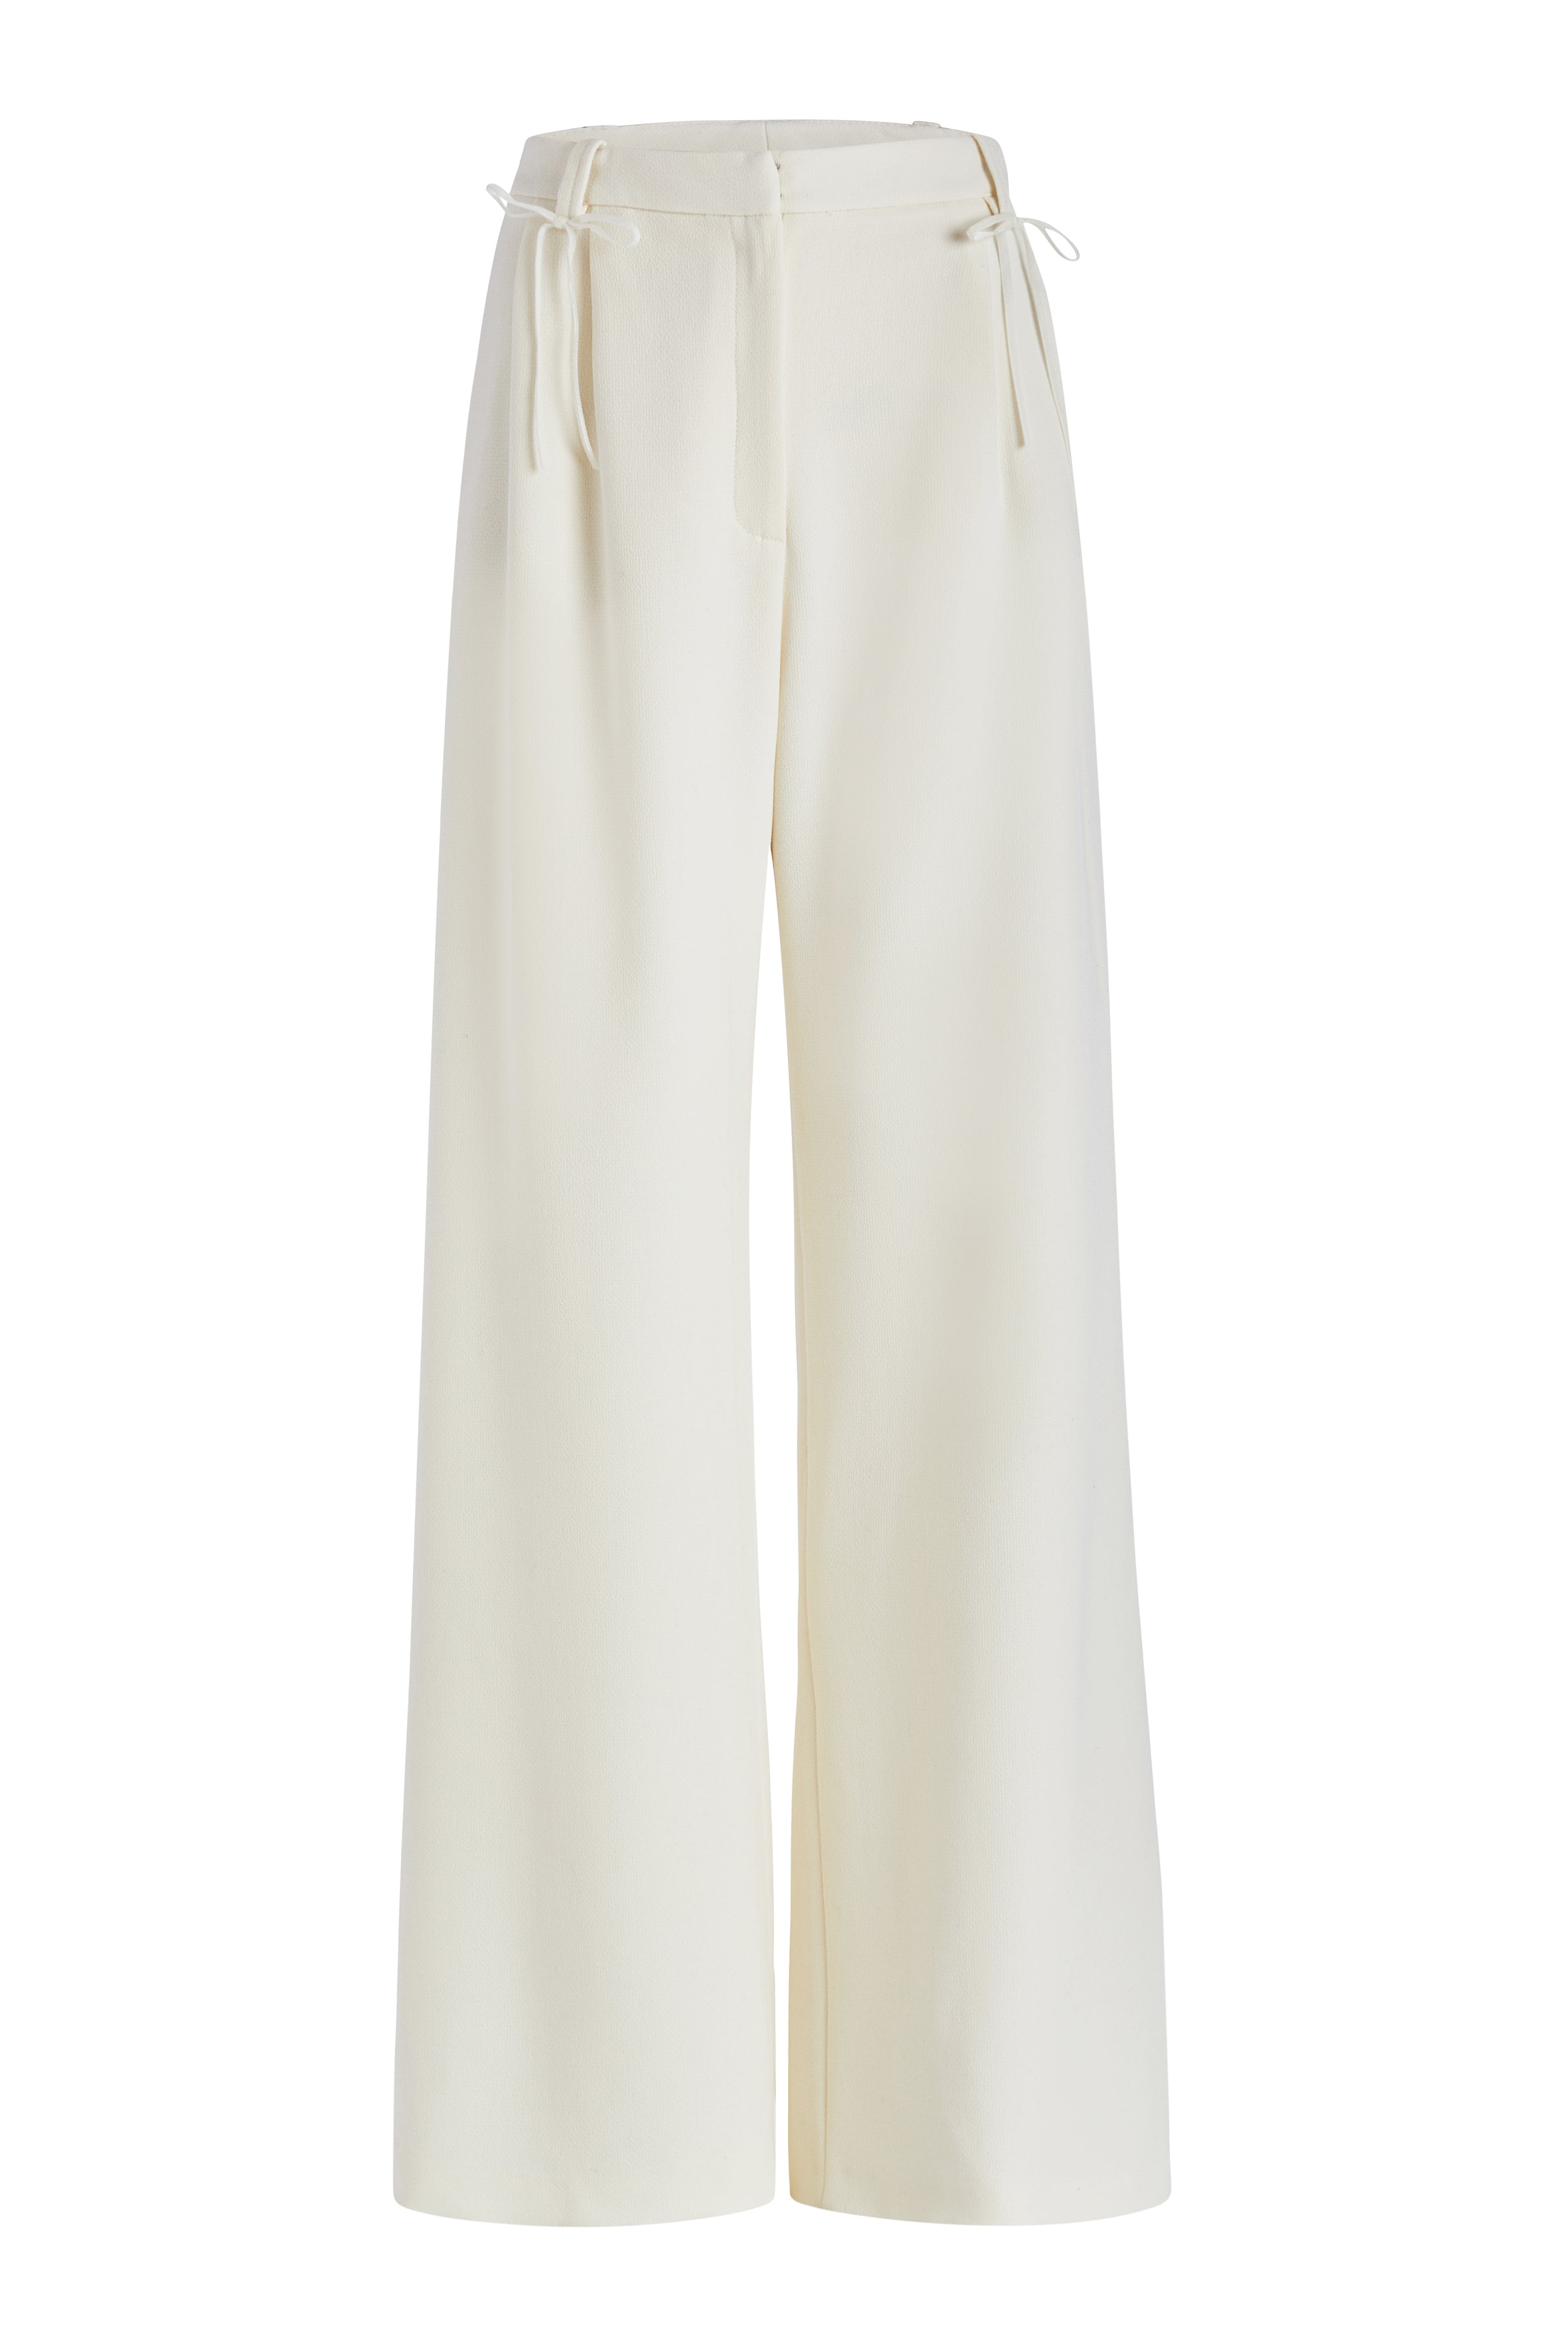 Lily Ivory Crepe Pant